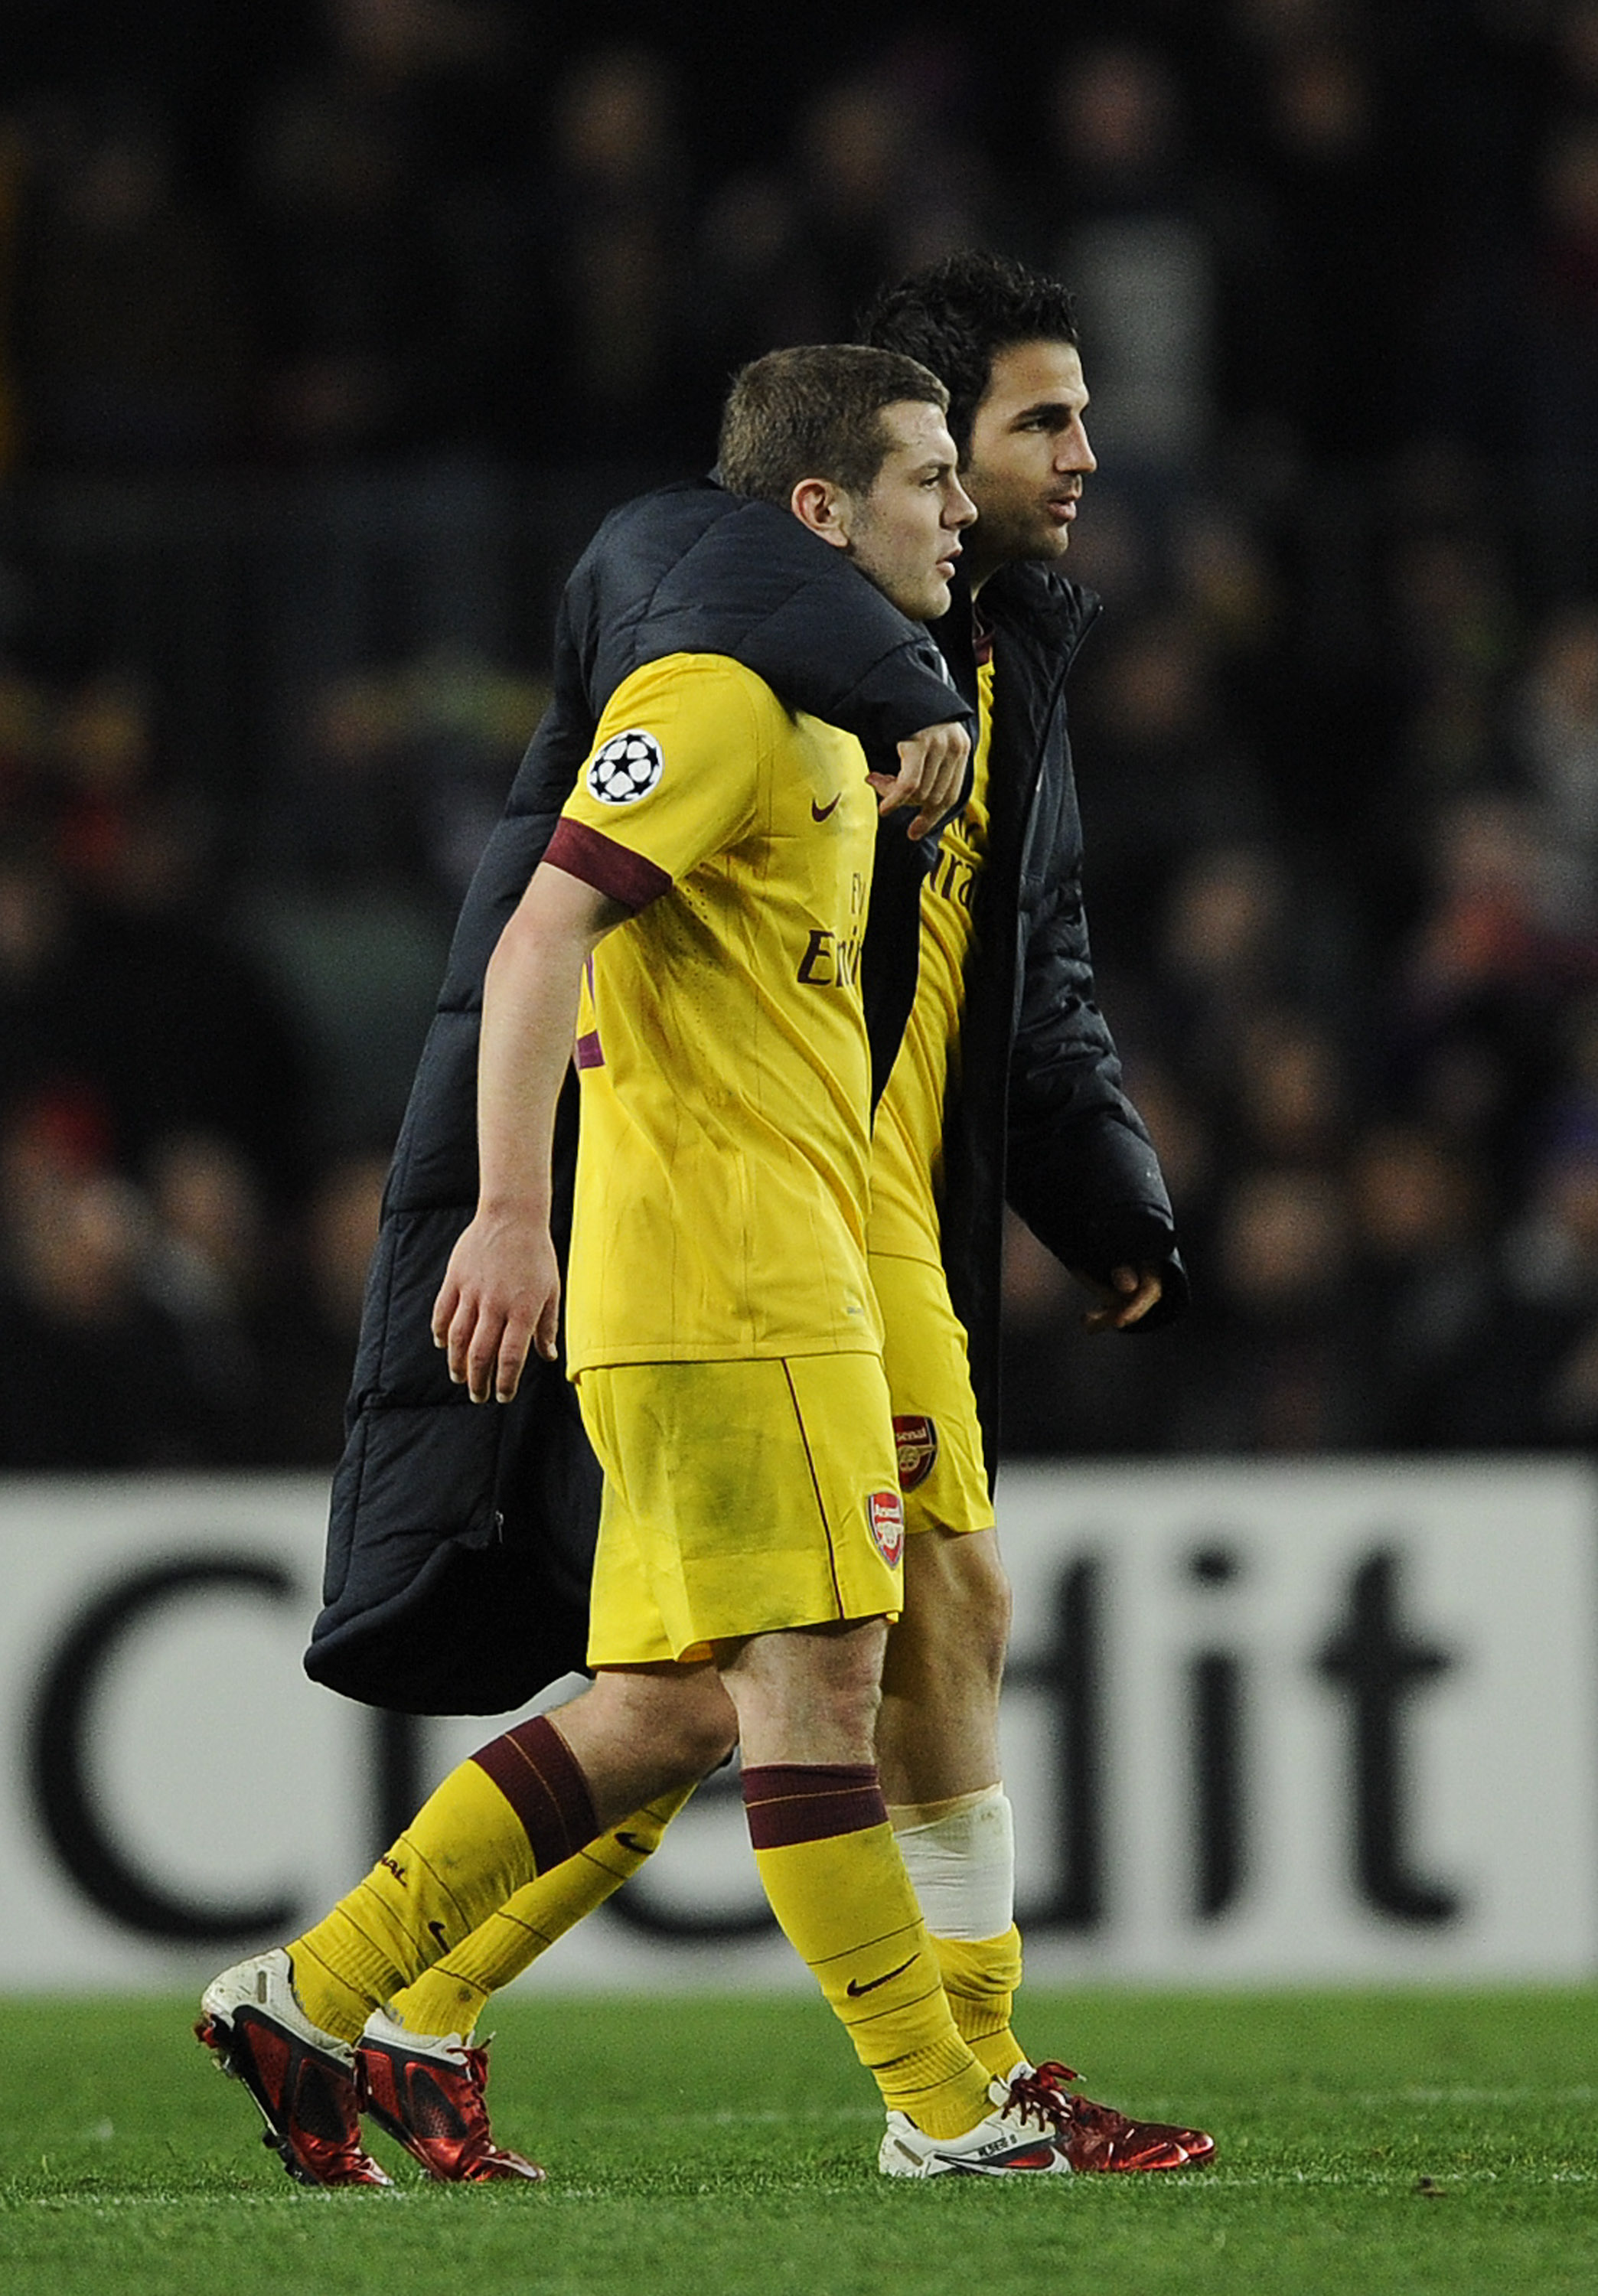 BARCELONA, SPAIN - MARCH 08:  Cesc Fabregas of Arsenal (R) consoles his team-mate Jack Wilshere of Arsenal at the end of the UEFA Champions League round of 16 second leg match between Barcelona and Arsenal at the Camp Nou stadium on March 8, 2011 in Barce